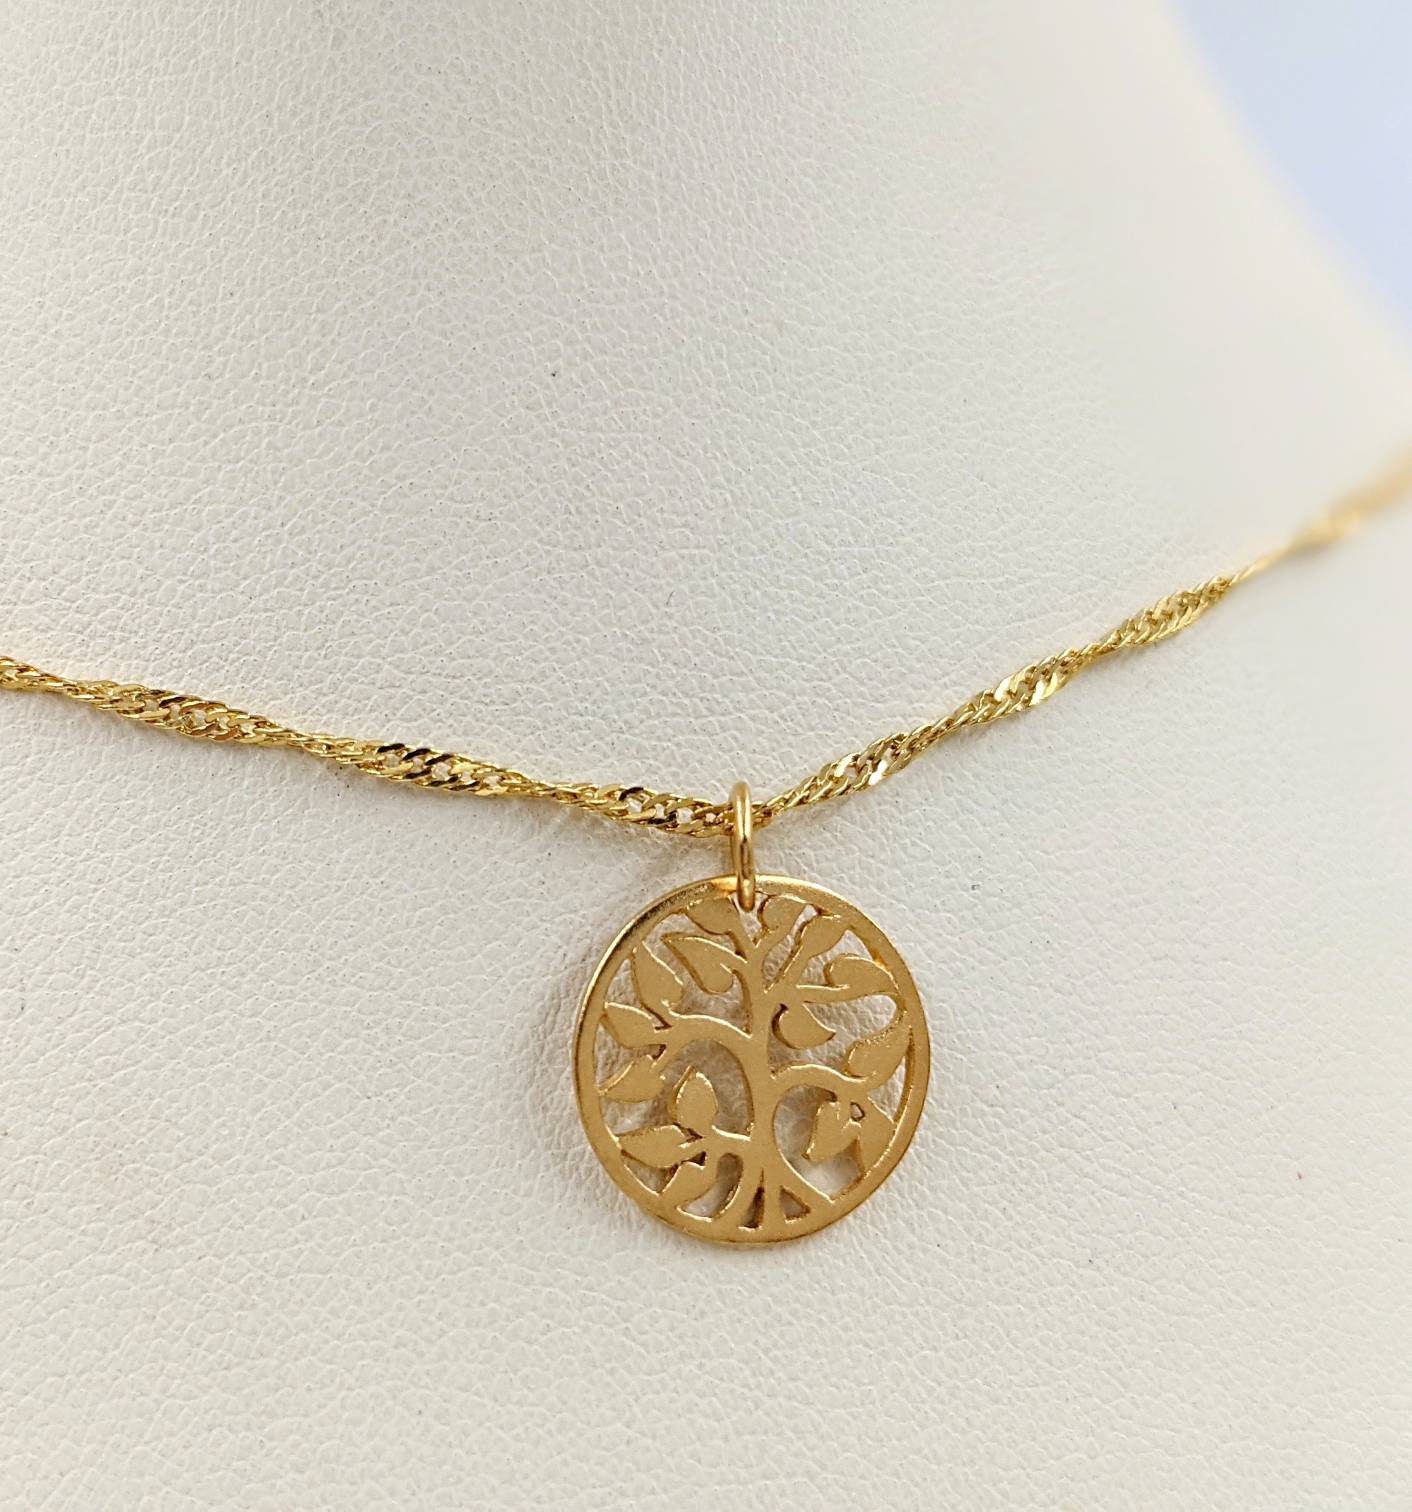 9CT GOLD TREE OF LIFE PENDANT - NEW - SOLID 9K GOLD | eBay